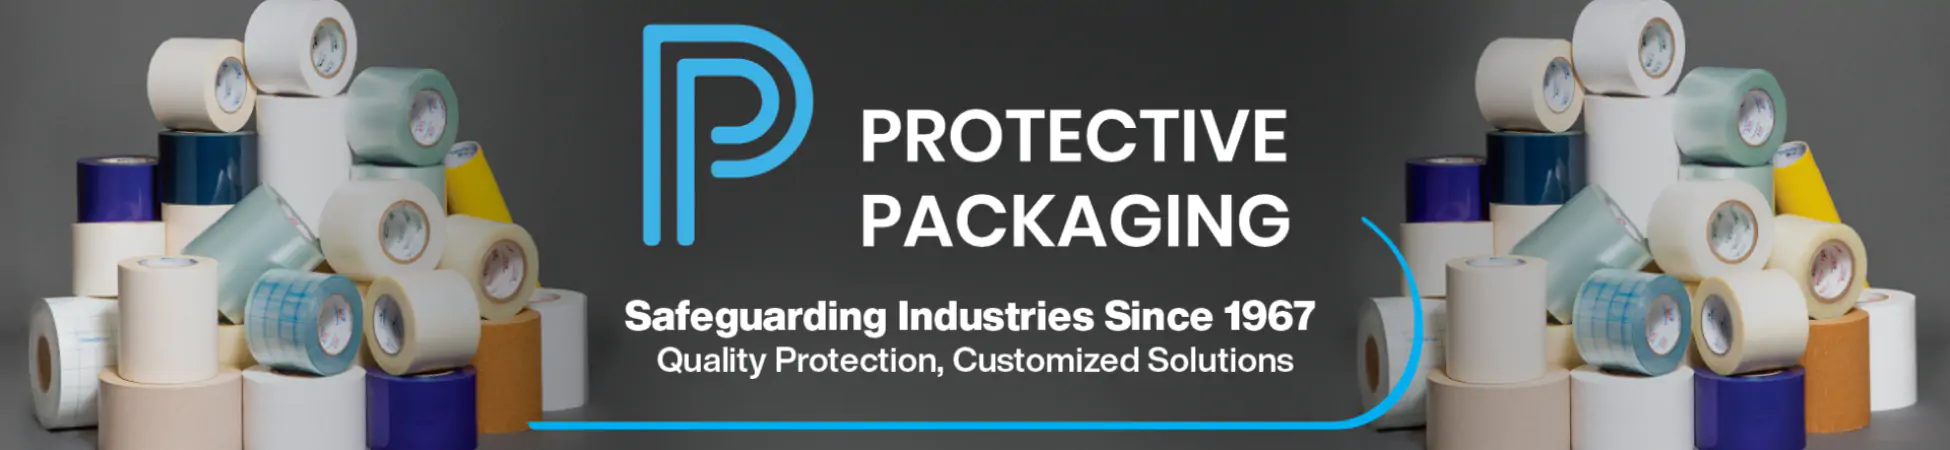 http://protectivepacking-live.epicorcommerce.com/faqs